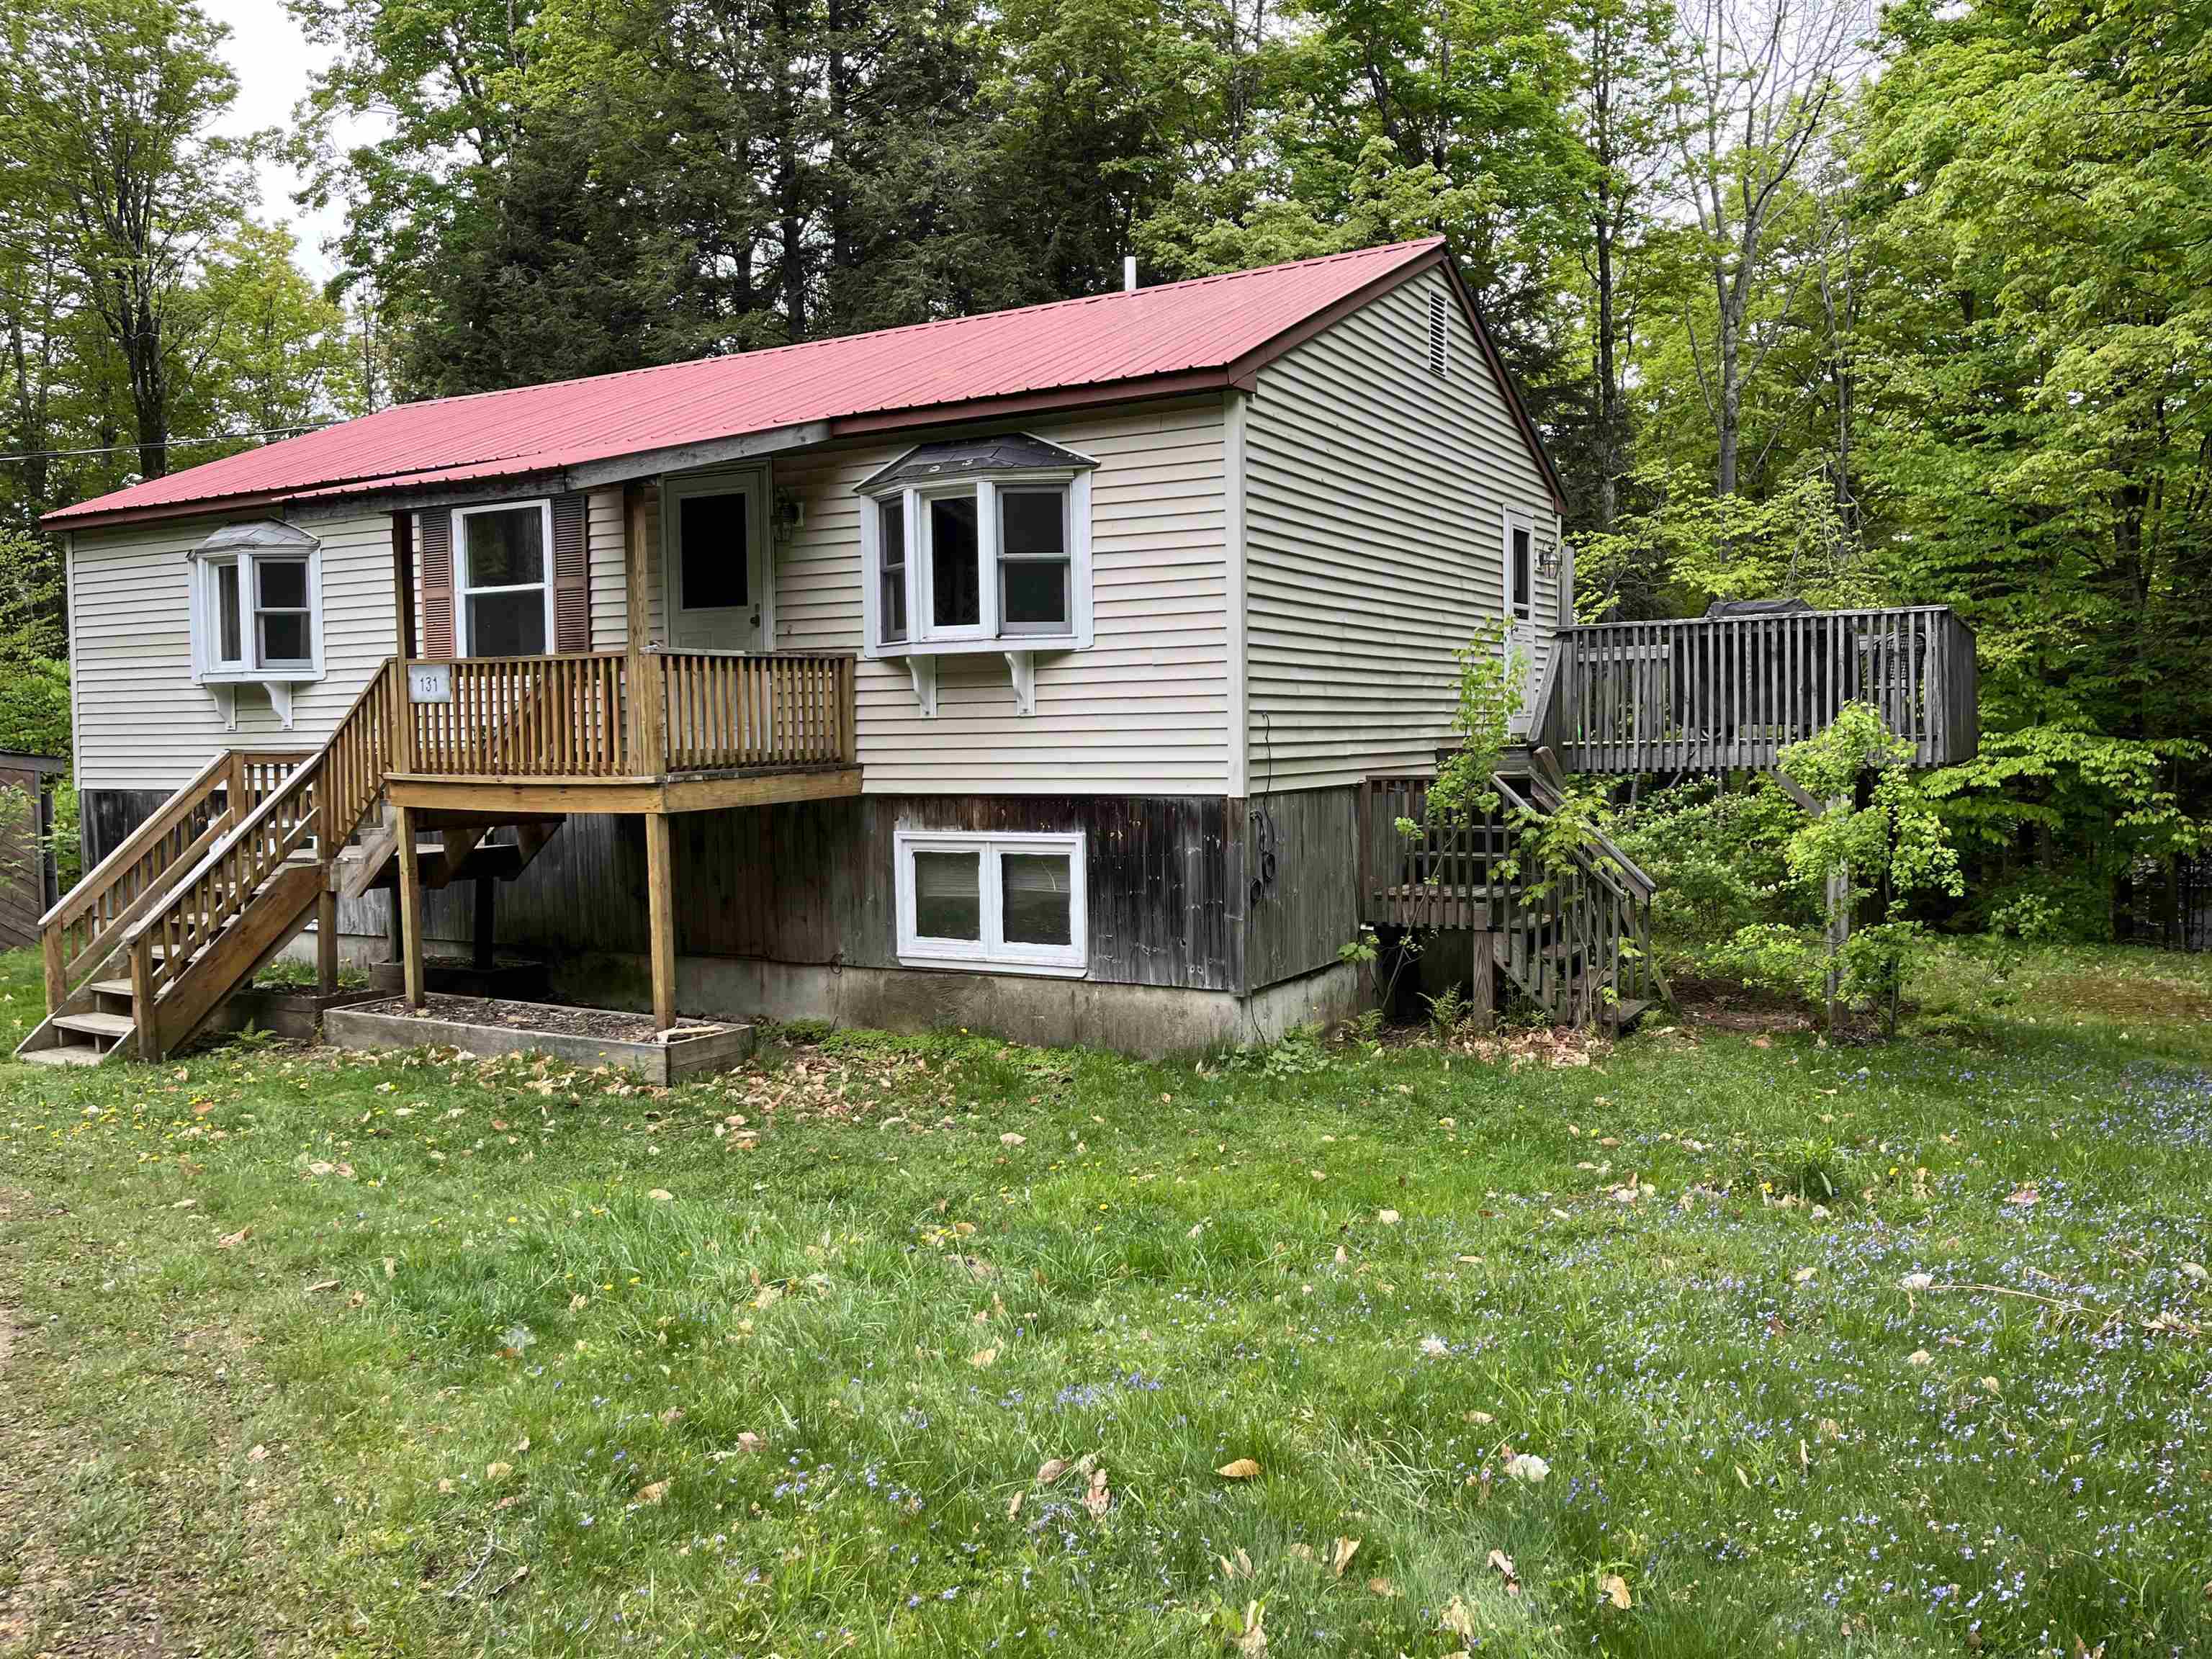 What a great opportunity to own this home that...